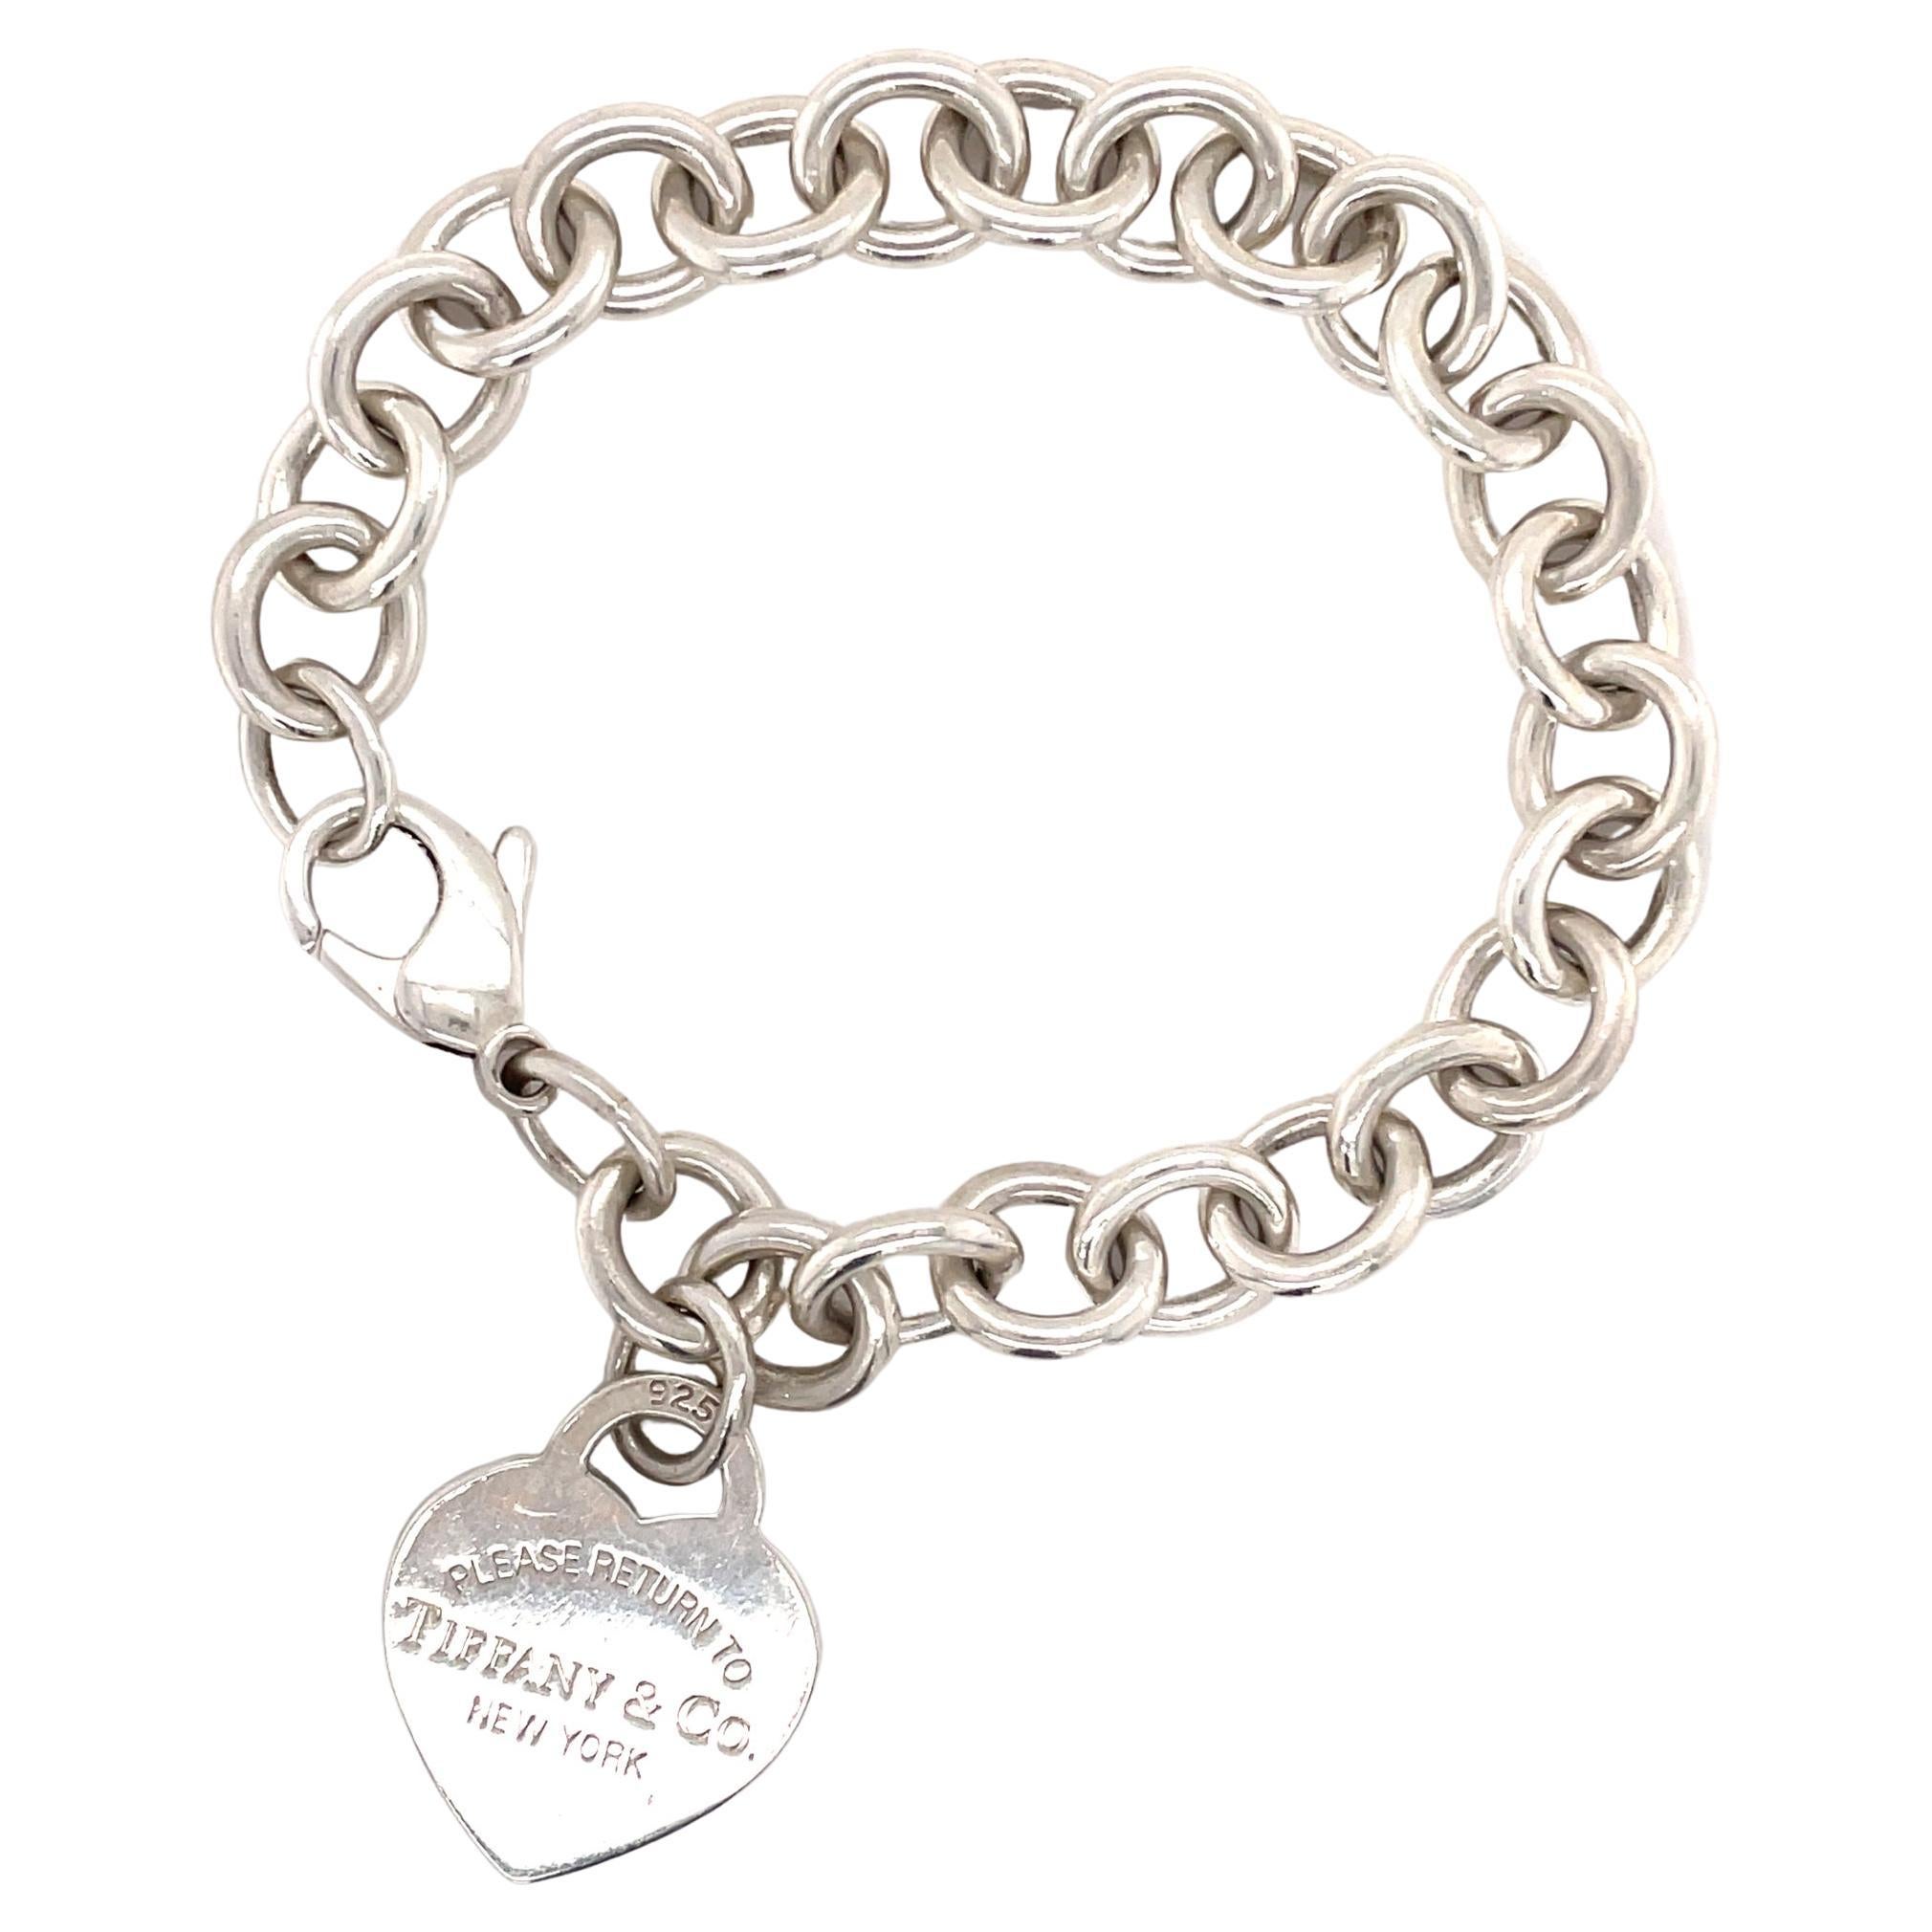 Tiffany & Co Return To Tiffany Heart Tag Chain Link Bracelet Sterling Silver 925